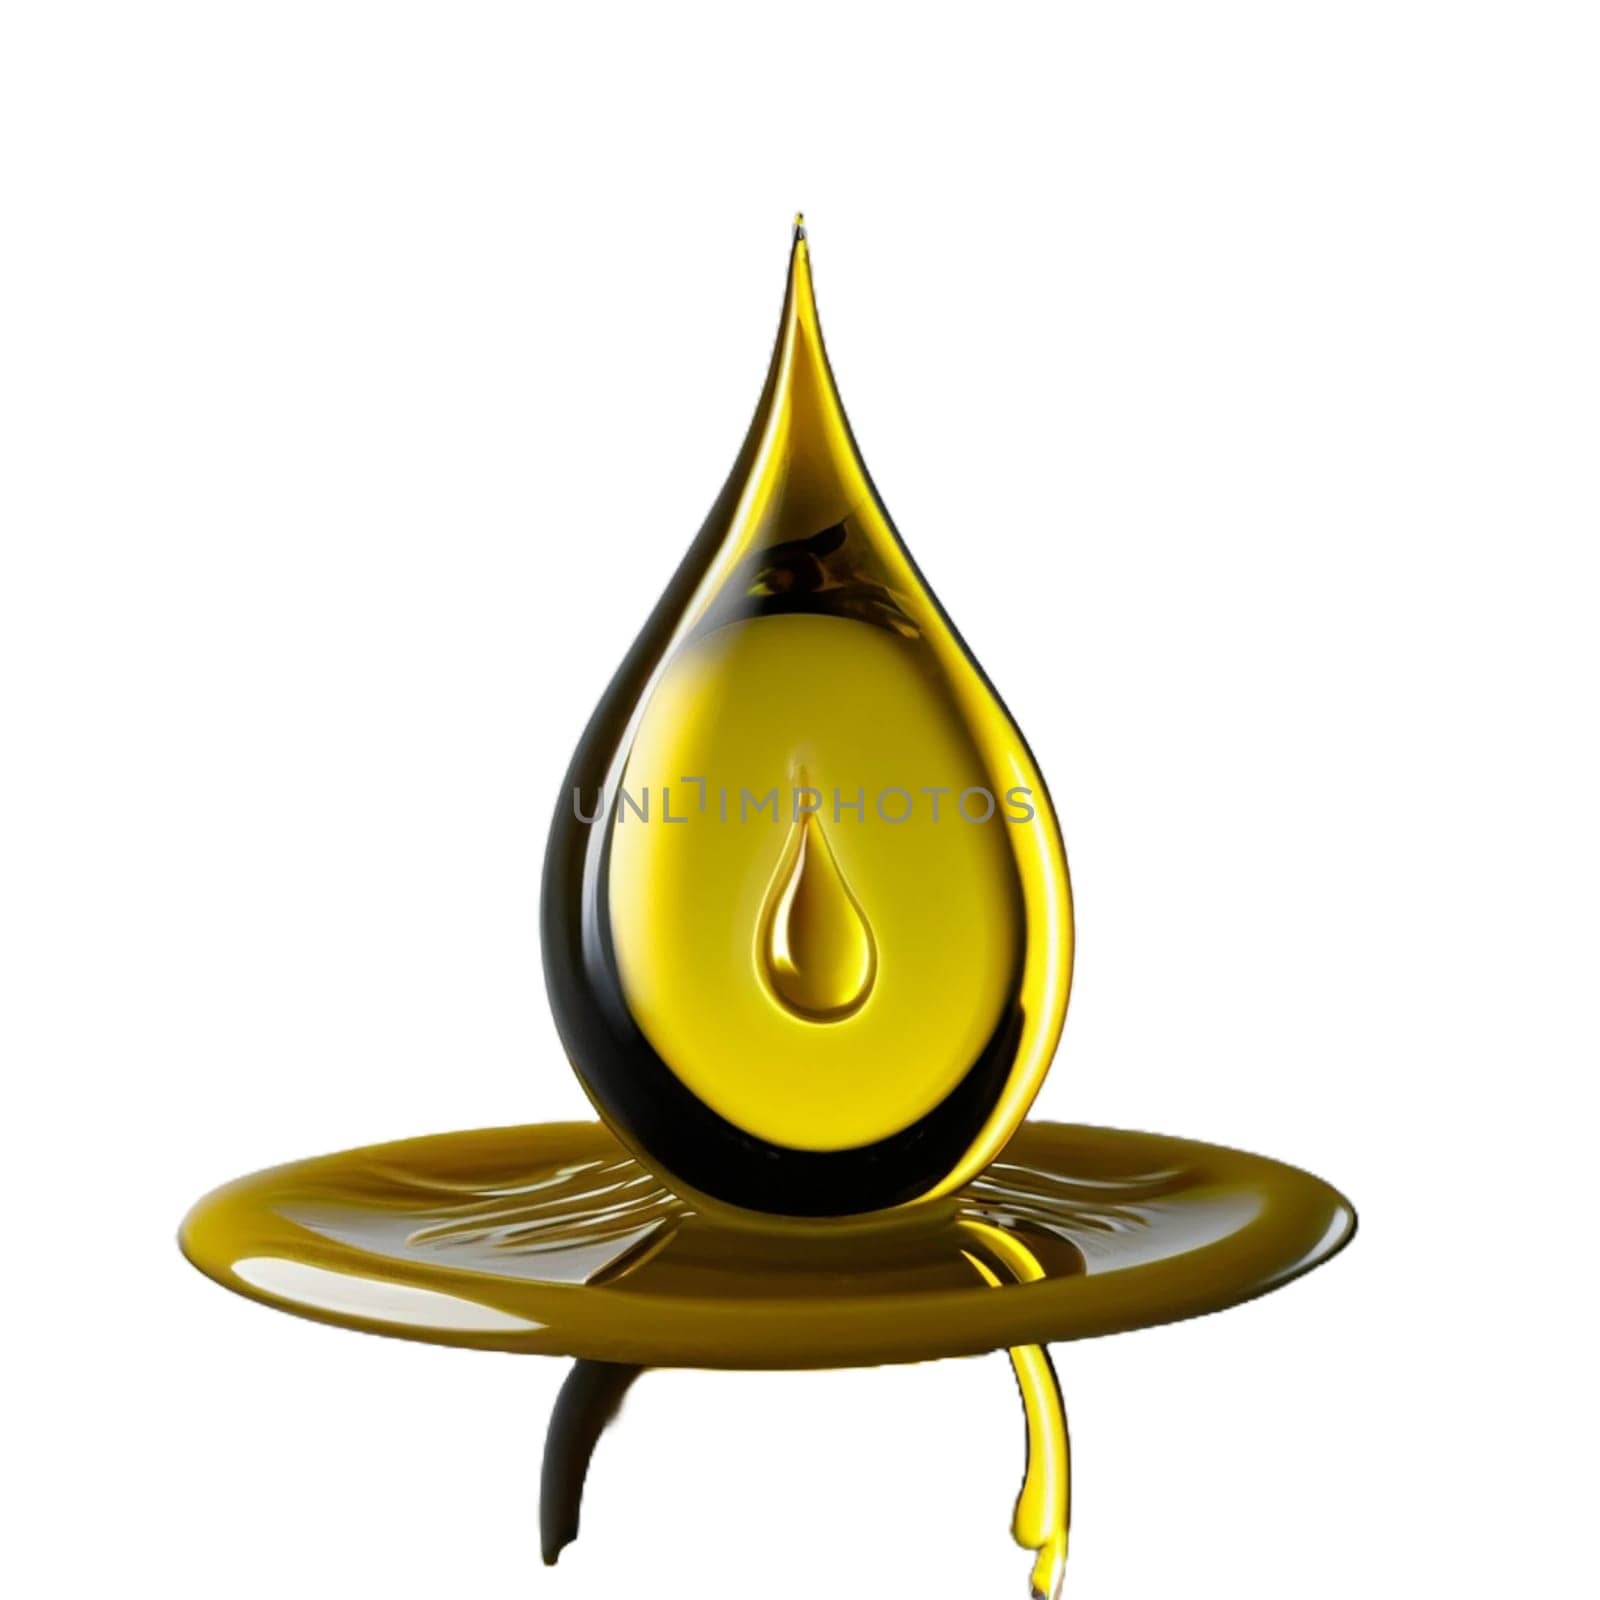 Oil drop isolated on white background as industrial or petroleum concept. png image by Costin